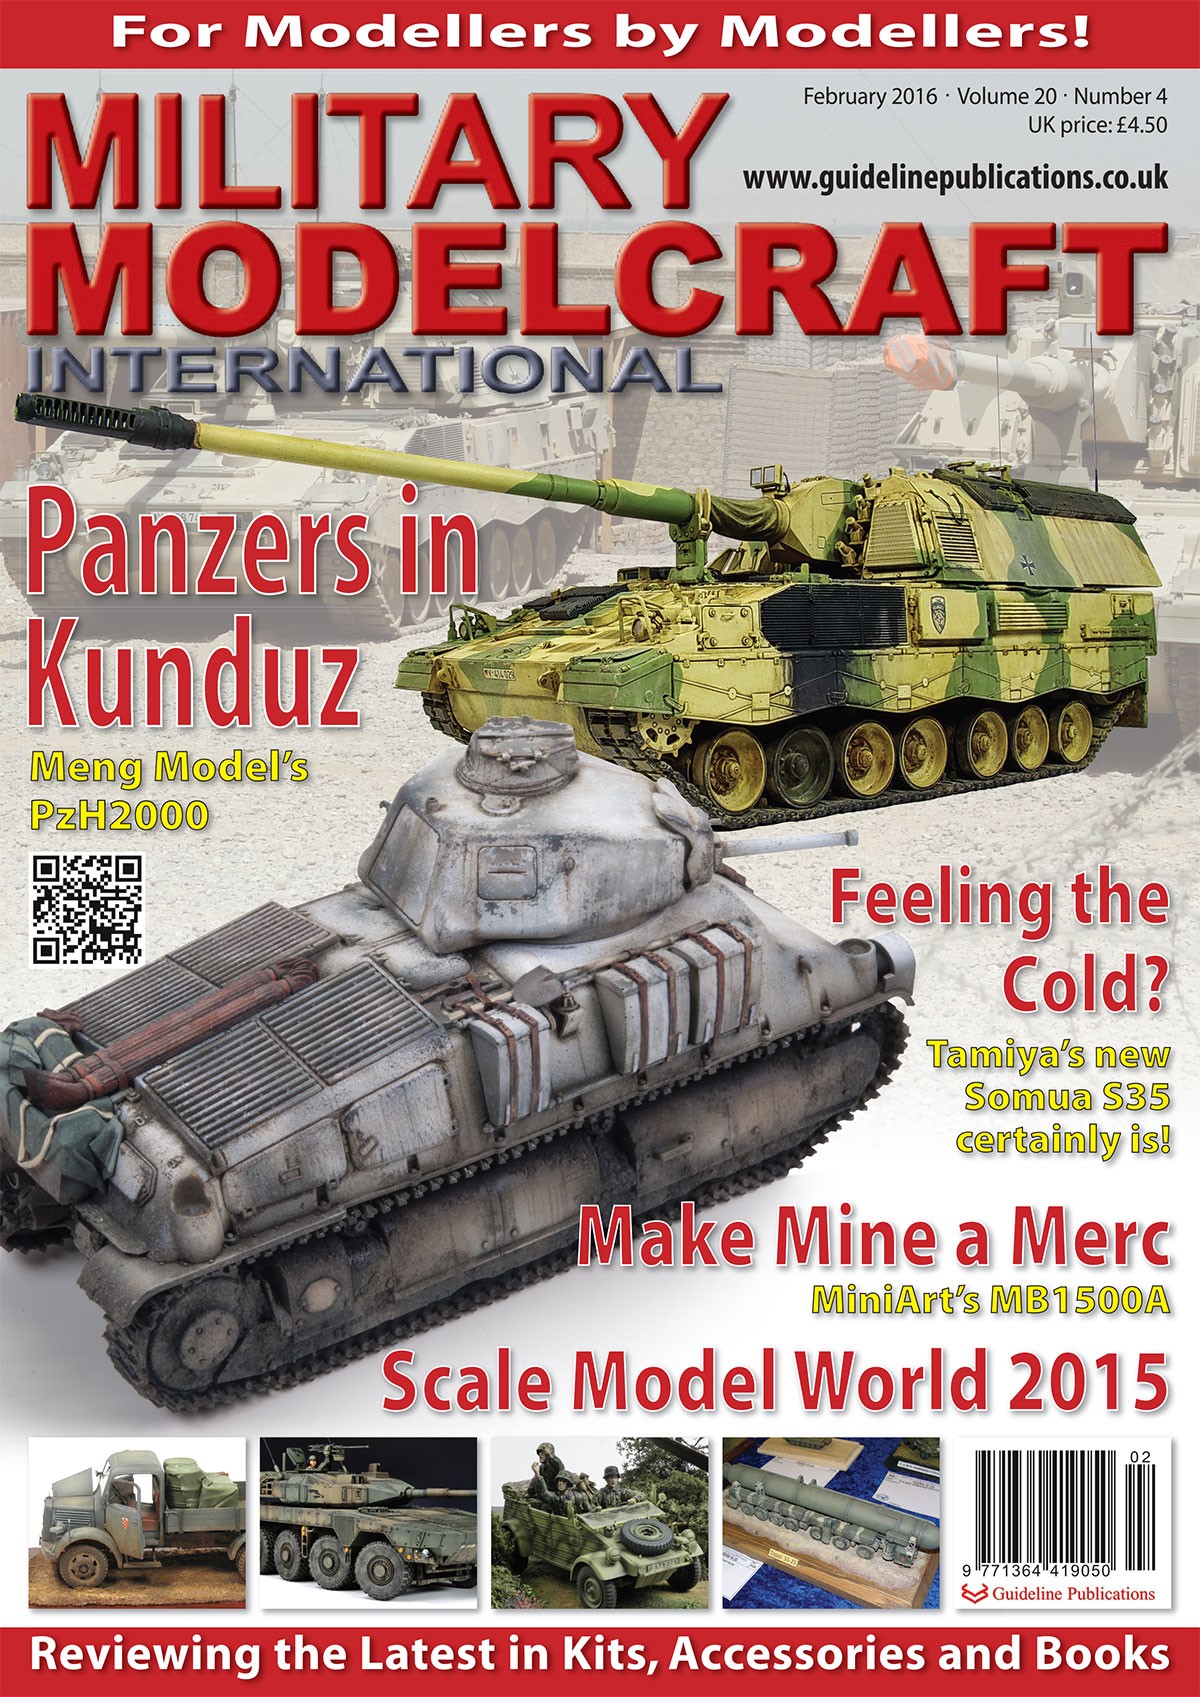 Guideline Publications Ltd Military Modelcraft February 2016 vol 20-04 